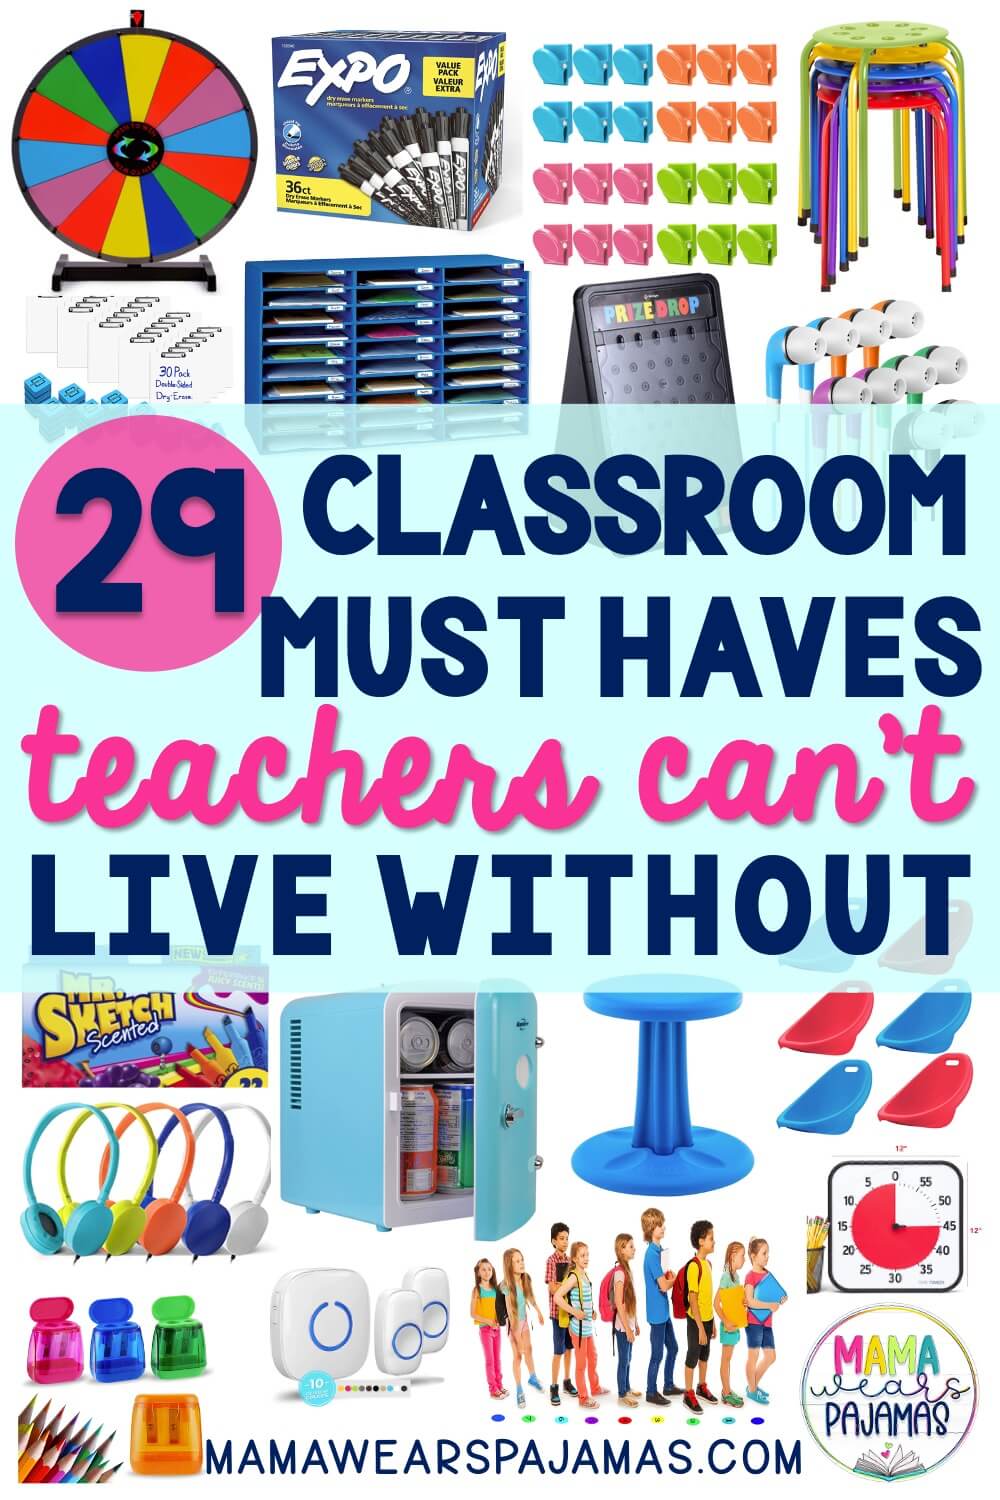 Top 15 Must-Have Classroom Supplies on